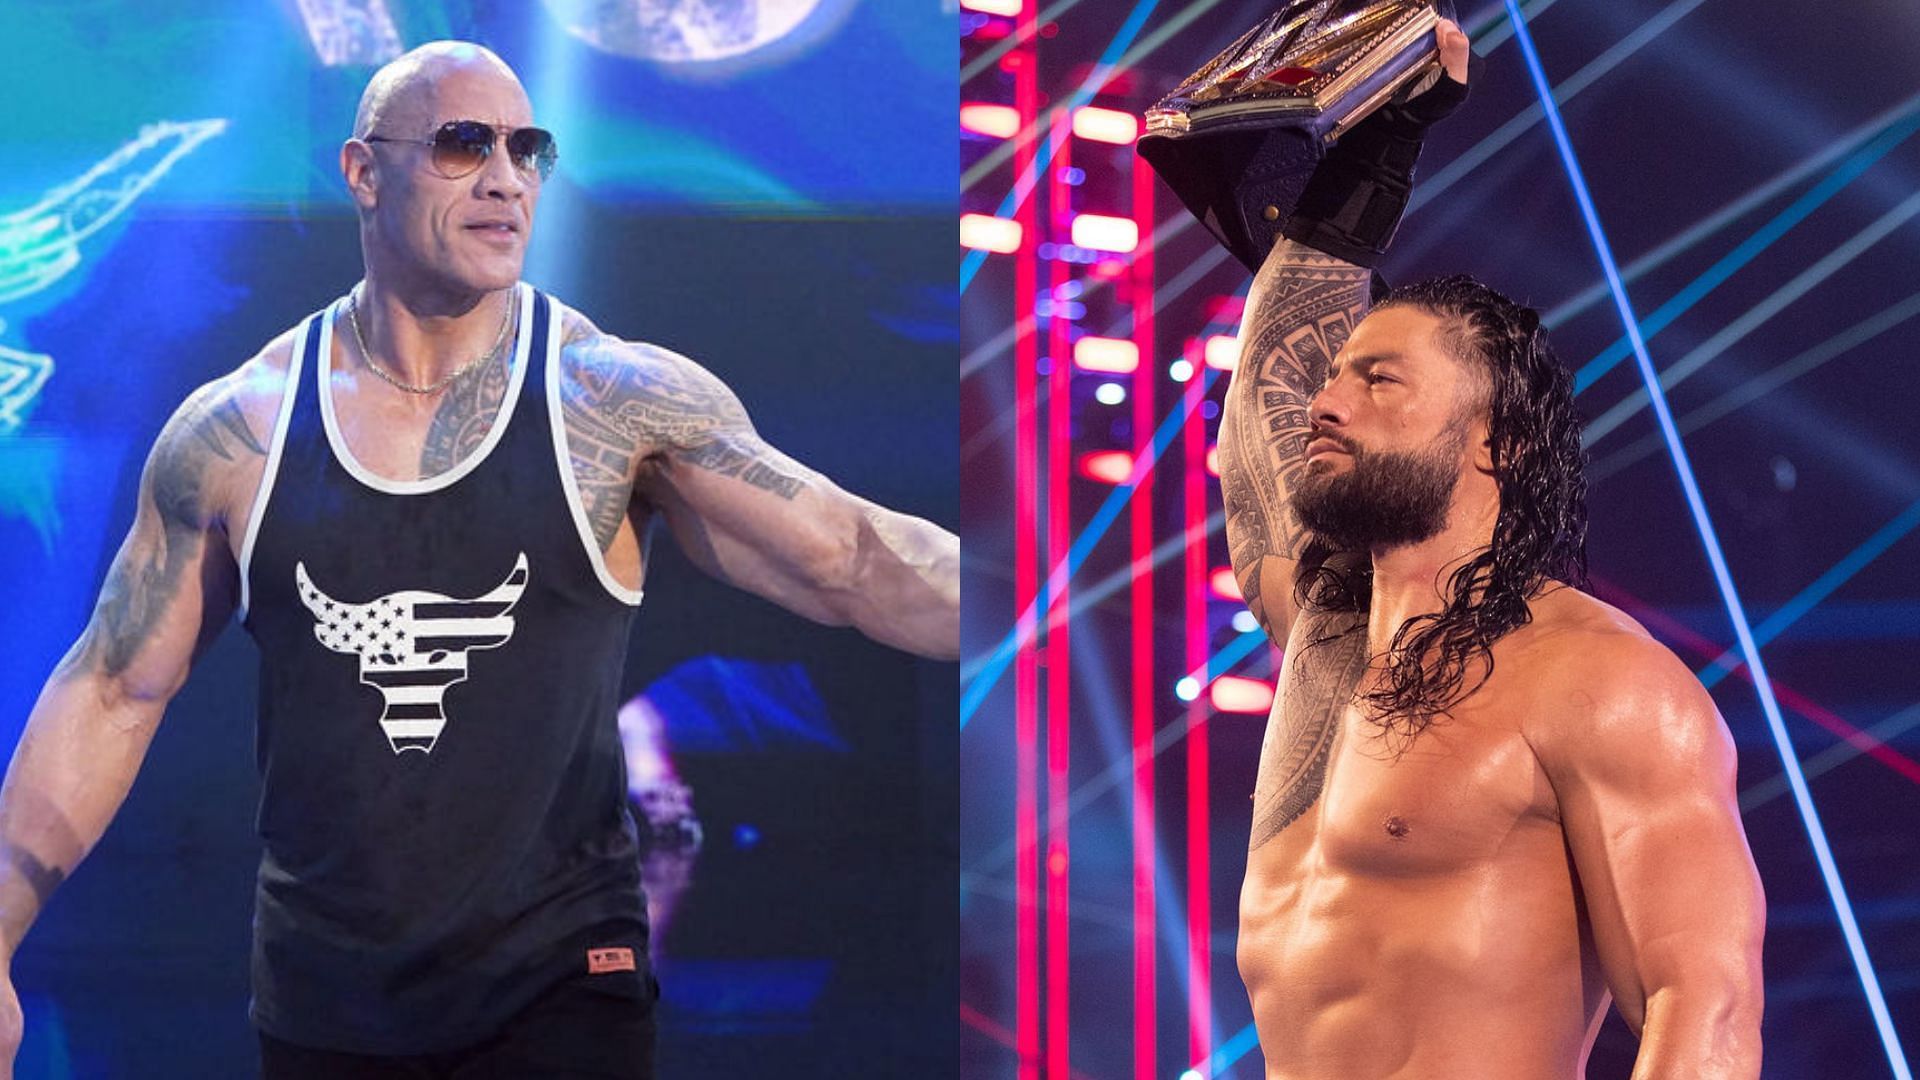 The Rock (left), Roman Reigns (right)